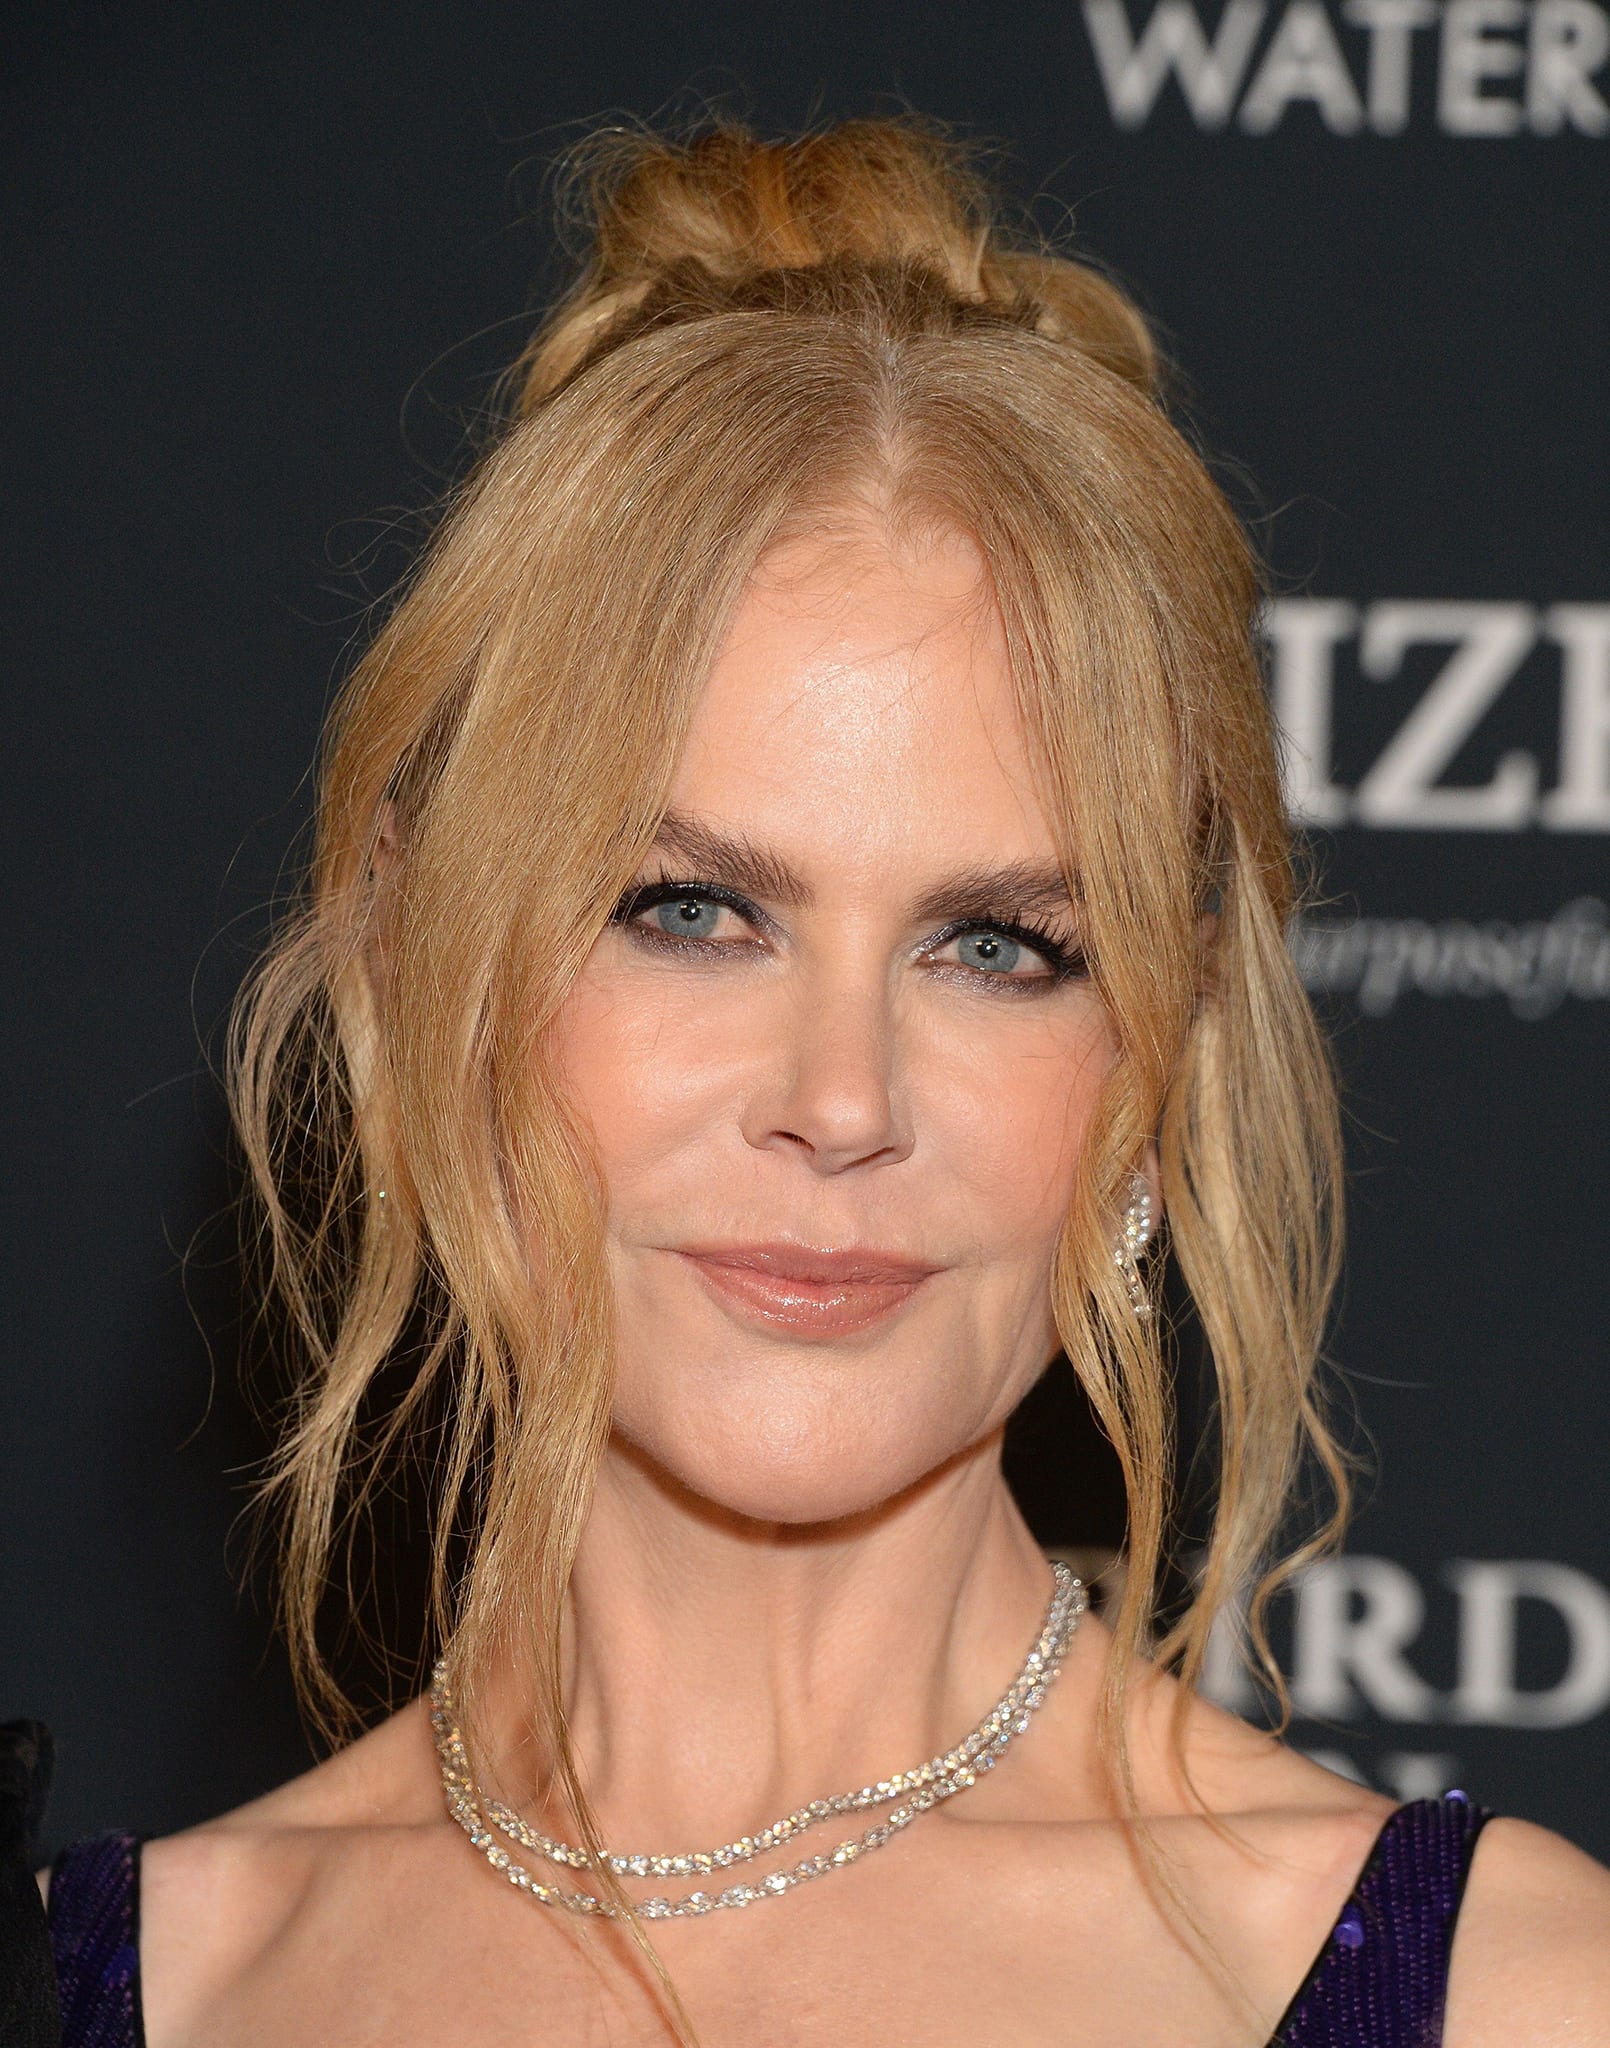 Nicole Kidman wears her red tresses up into a chic bun with loose tendrils framing her gorgeously made-up face